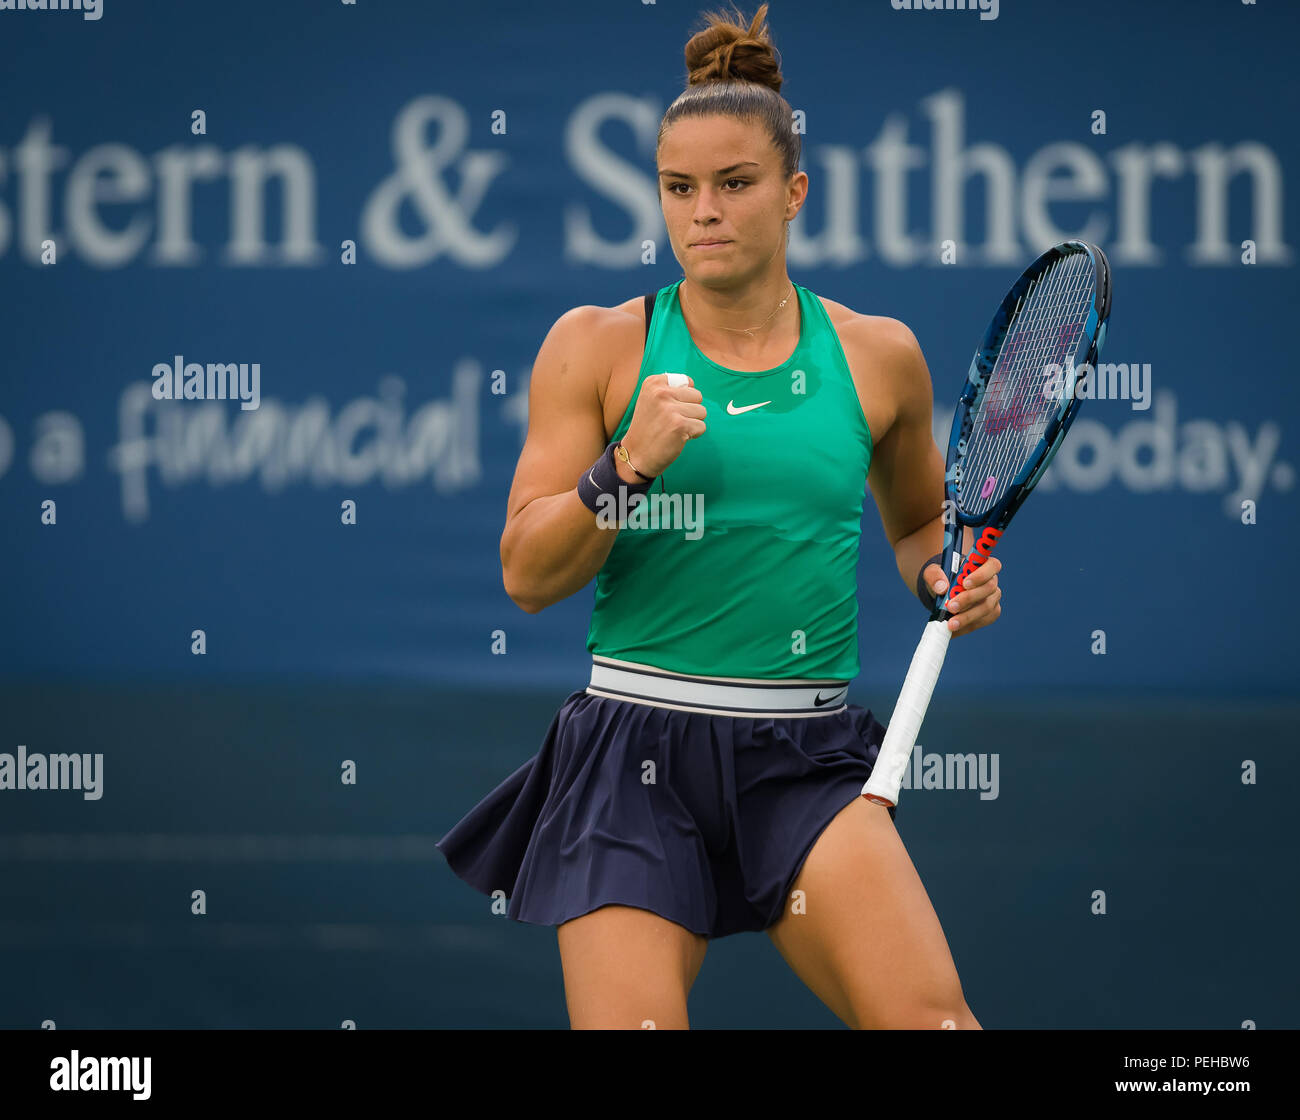 Cincinnati, Ohio, USA. 15th Aug, 2018. Maria Sakkari of Greece in action during her second-round match at the 2018 Western and Southern Open WTA Premier 5 tennis tournament